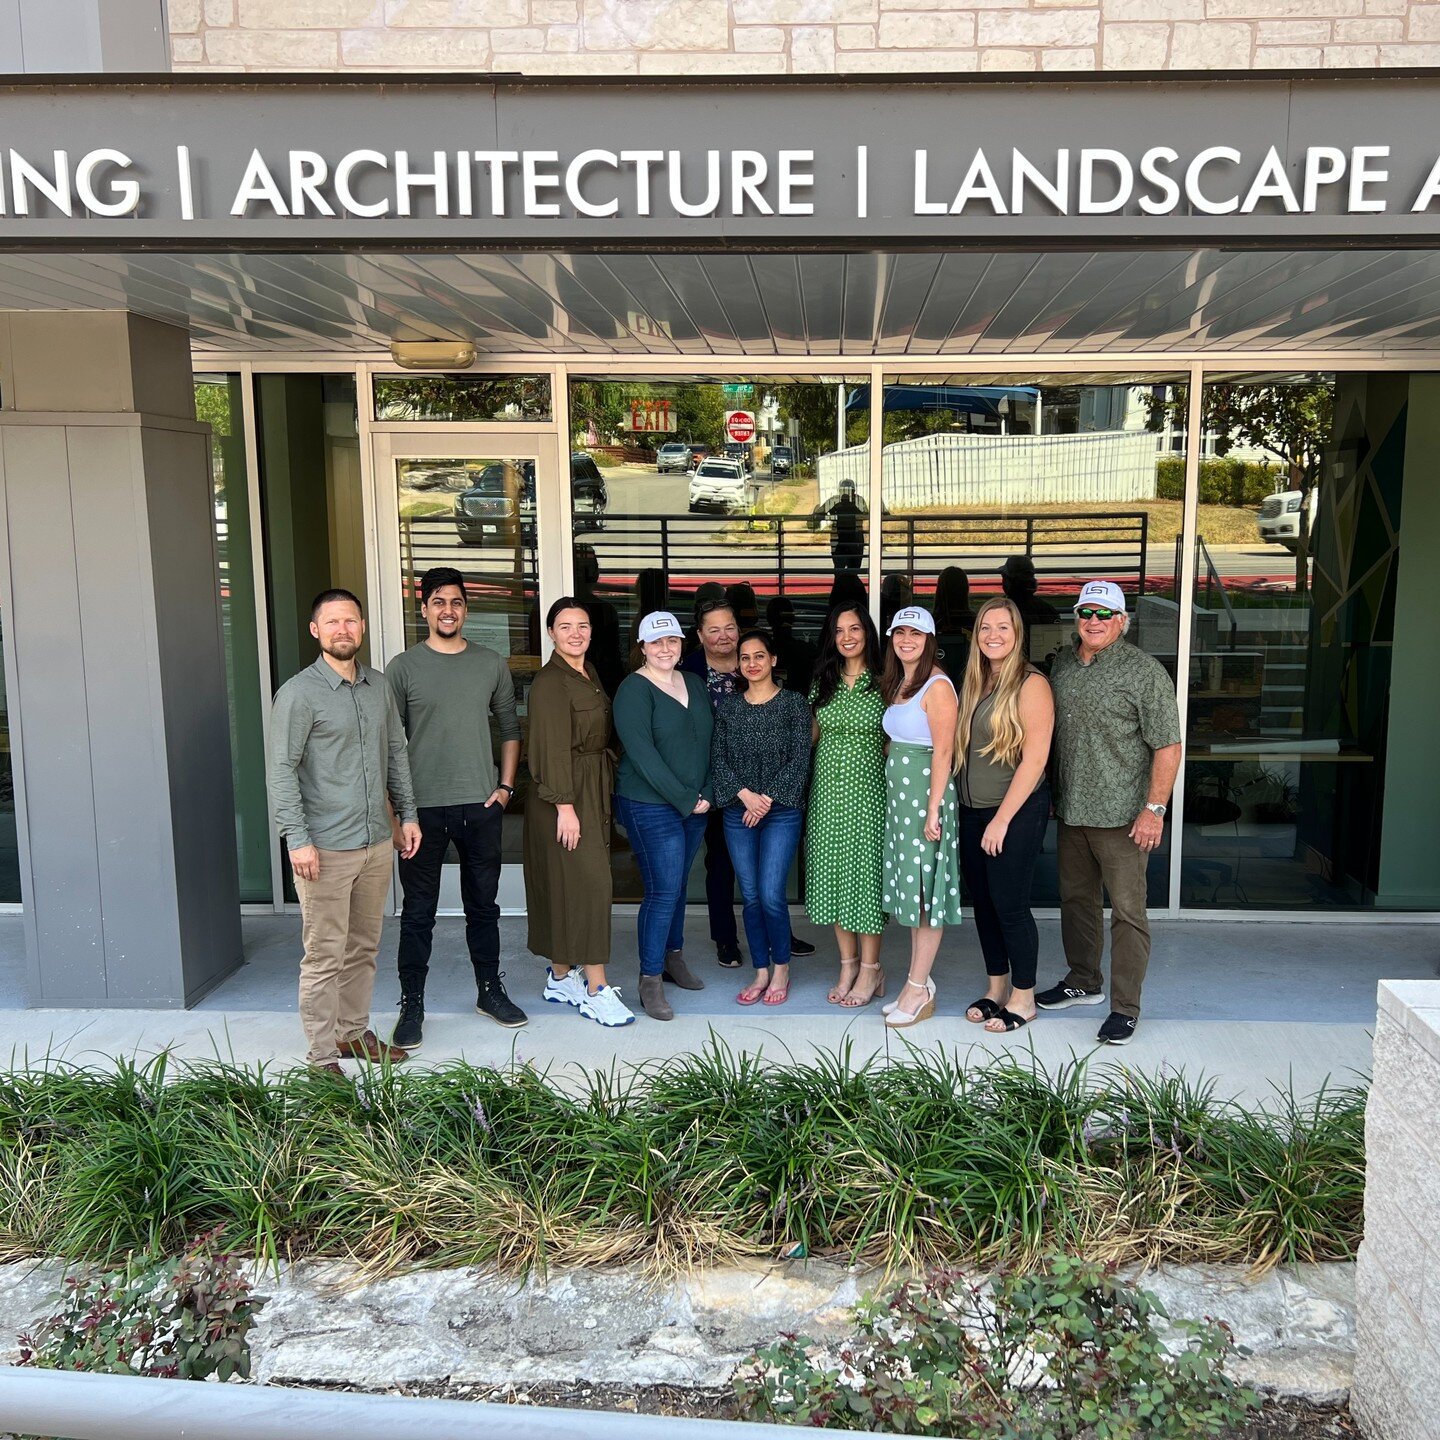 When everyone in the office coincidentally all wear green, you have to take a group photo. 

Notice Michael, who did not wear green, had to take the photo. Sorry, not sorry Michael. Wear green next time.

#Planning #Architecture #LandscapeArchitectur